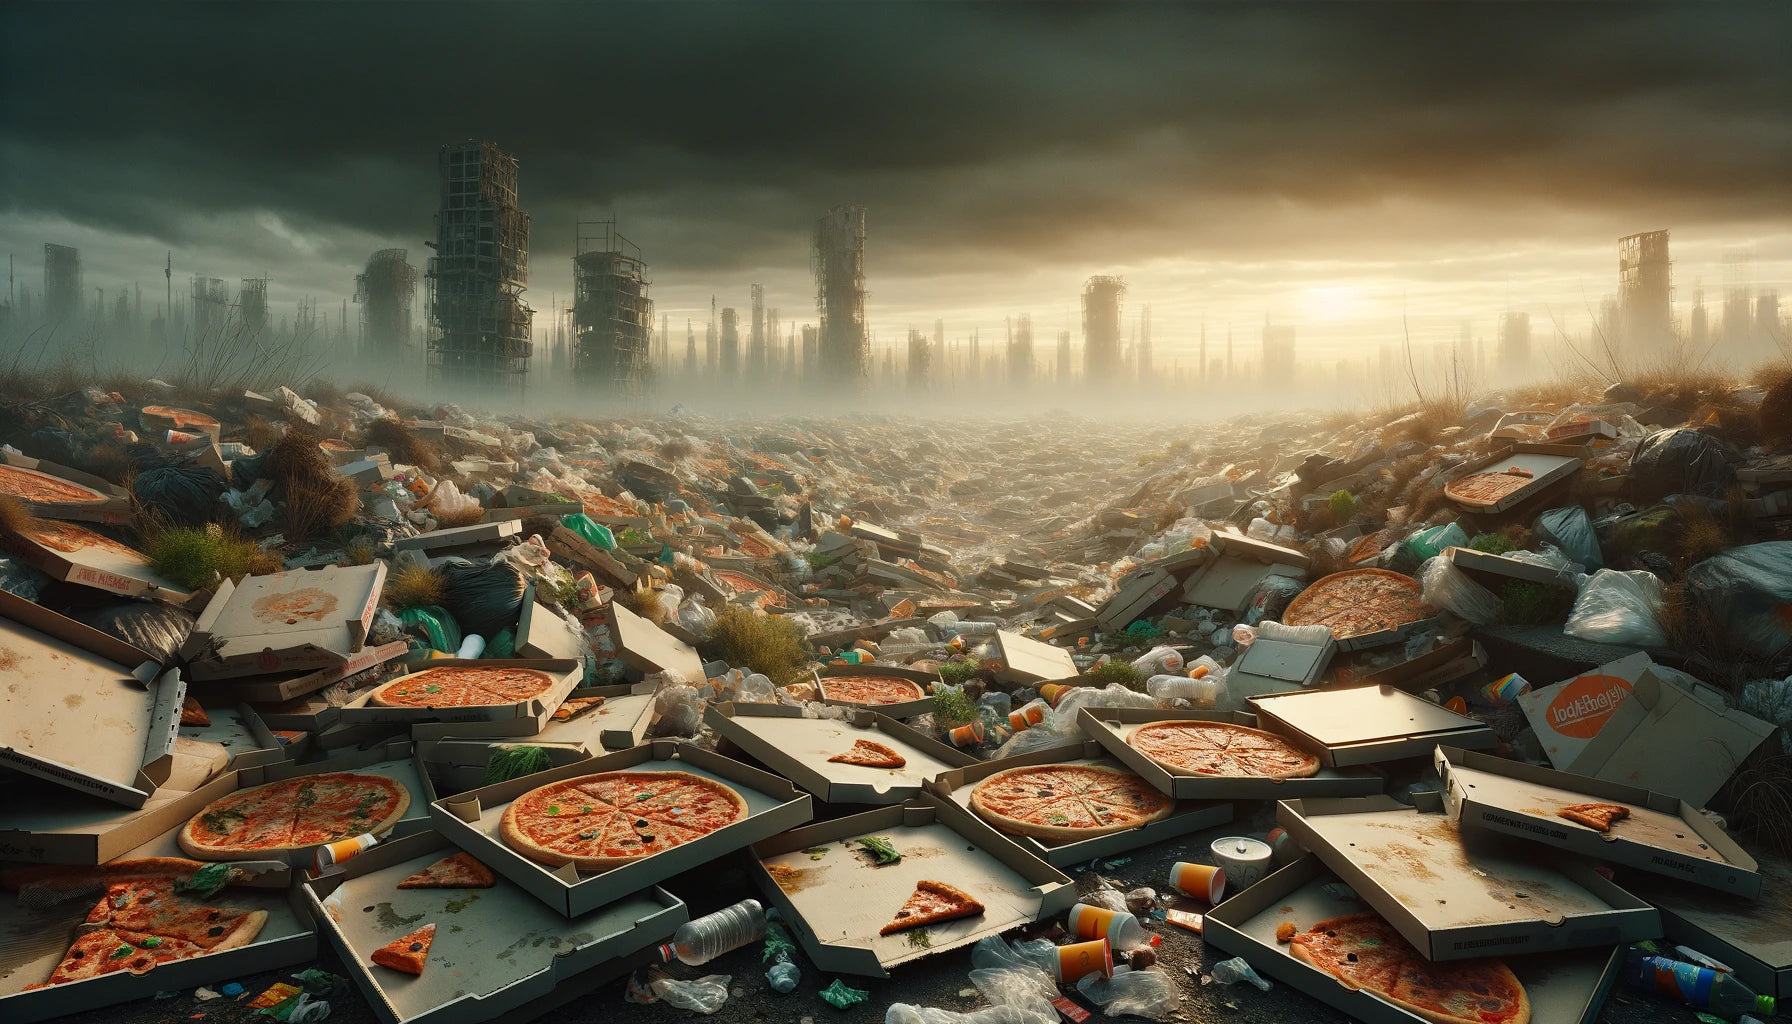 Single-use pizza boxes horror scenario dumpster trash waste not sustainable environment AI